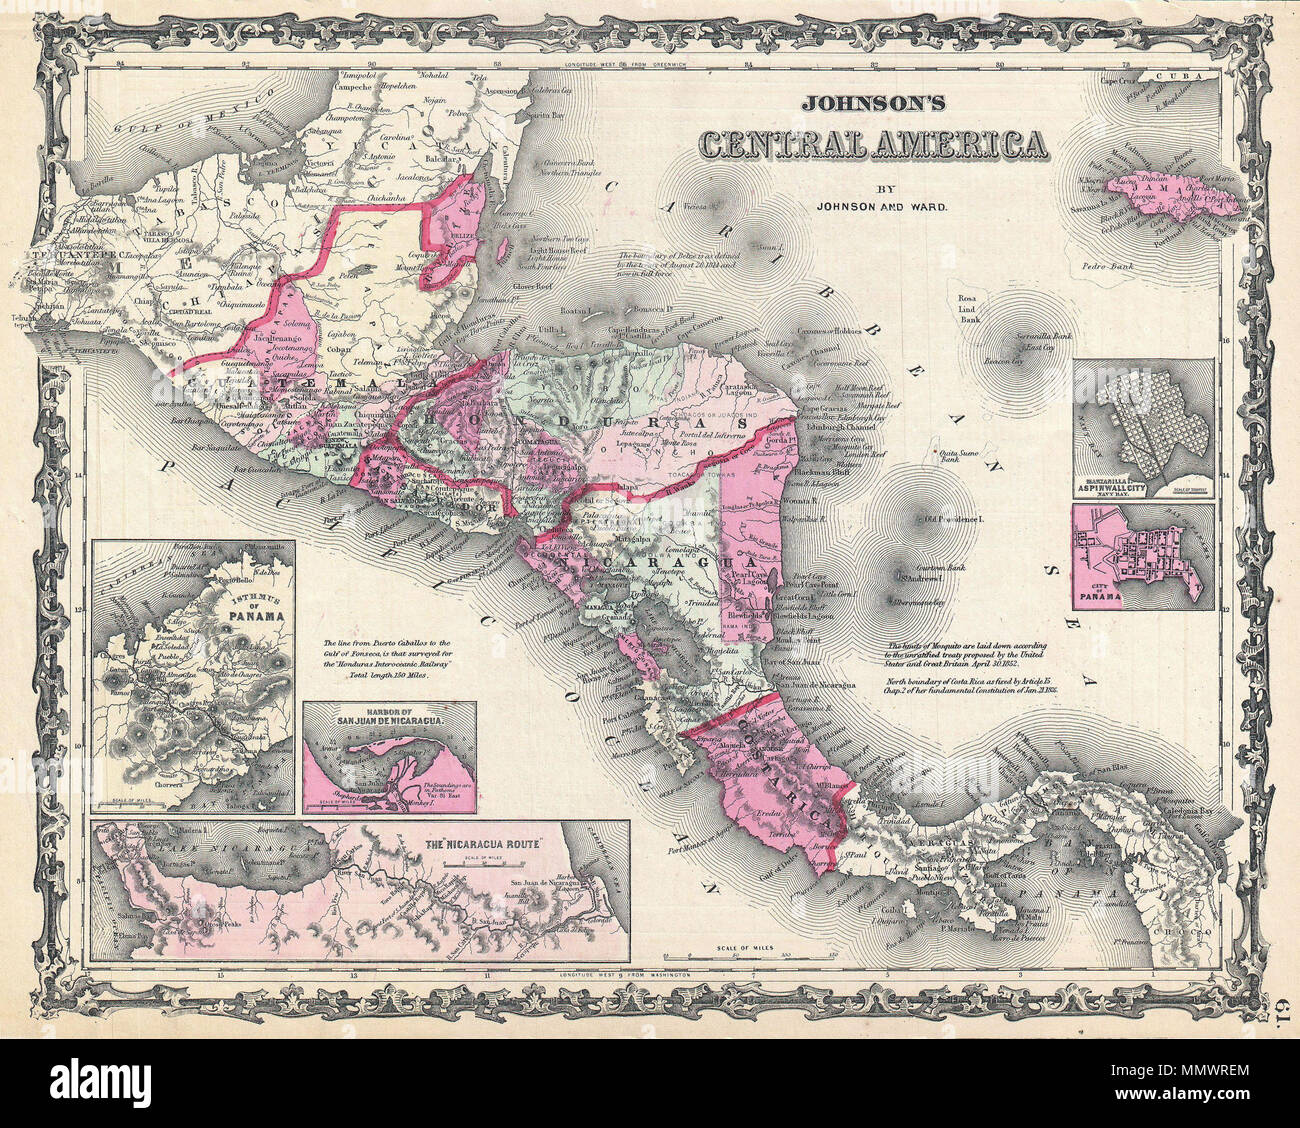 .  English: This is A. J. Johnson and Ward’s 1862 map of Central America. Covers Central America from the Isthmus of Tehuantepec, Mexico to the Bay of Panama. Shows the countries of Guatemala, Honduras, El Salvador, Nicaragua, and Costa Rica. Jamaica appears in the upper right corner. Shows proposed roadways, cities, rivers, and ferry crossings. The lower left hand quadrant features three inset maps. In a clockwise fashion from top left these detail the Isthmus of Panama, the Nicaragua Route to the Pacific, and the Harbor of San Juan de Nicaragua. Two additional insets on the right hand side o Stock Photo